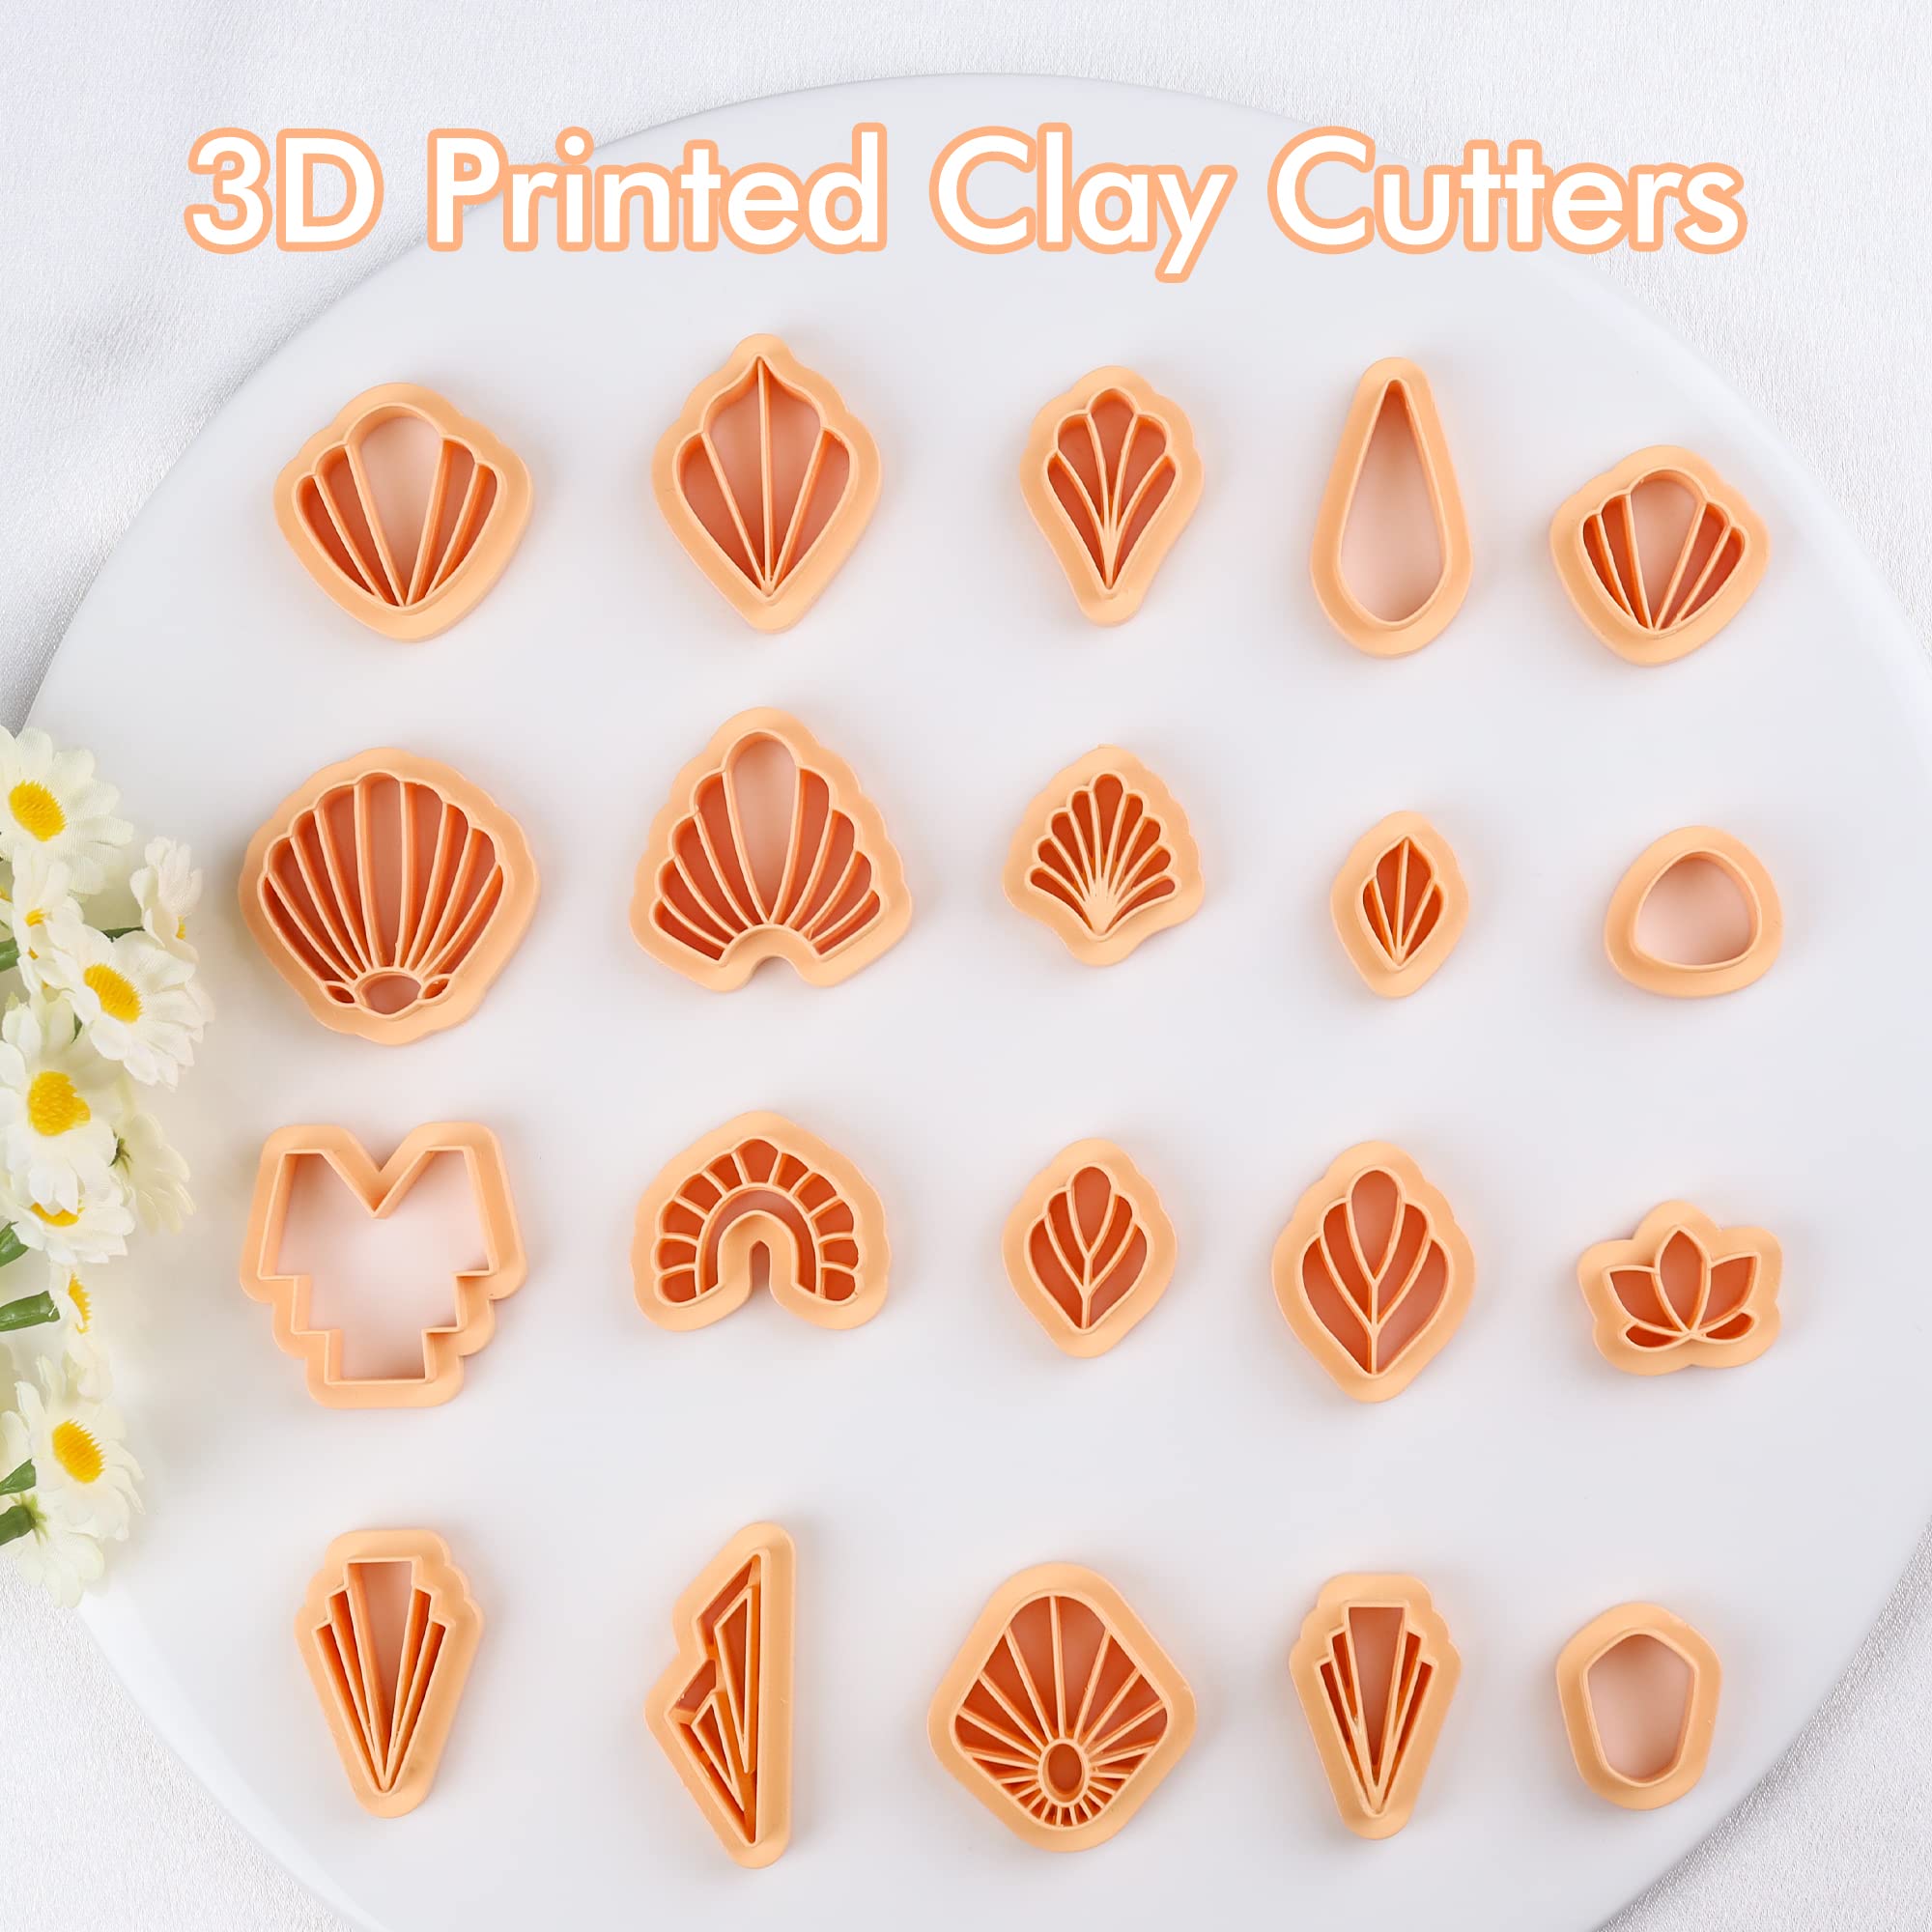 Puocaon Easter Polymer Clay Cutters - 15 Pcs Clay Cutters for Polymer